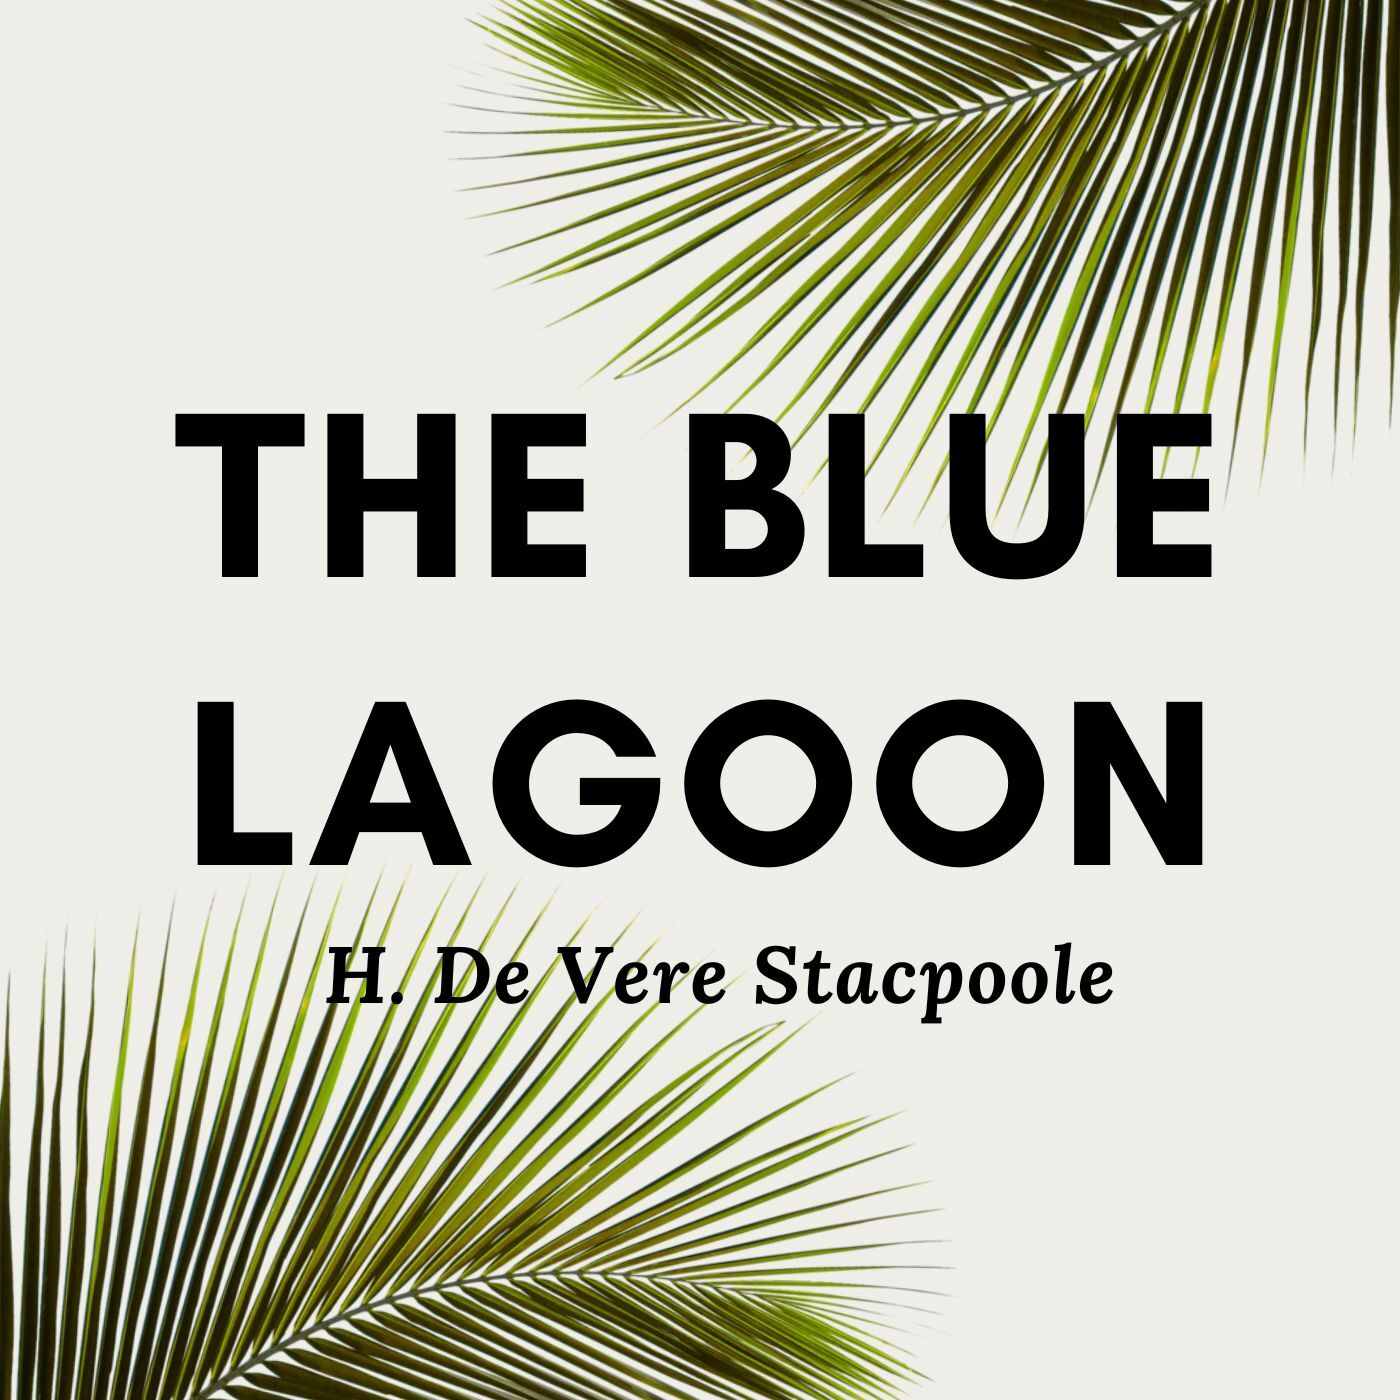 The Blue Lagoon by H. De Vere Stacpoole